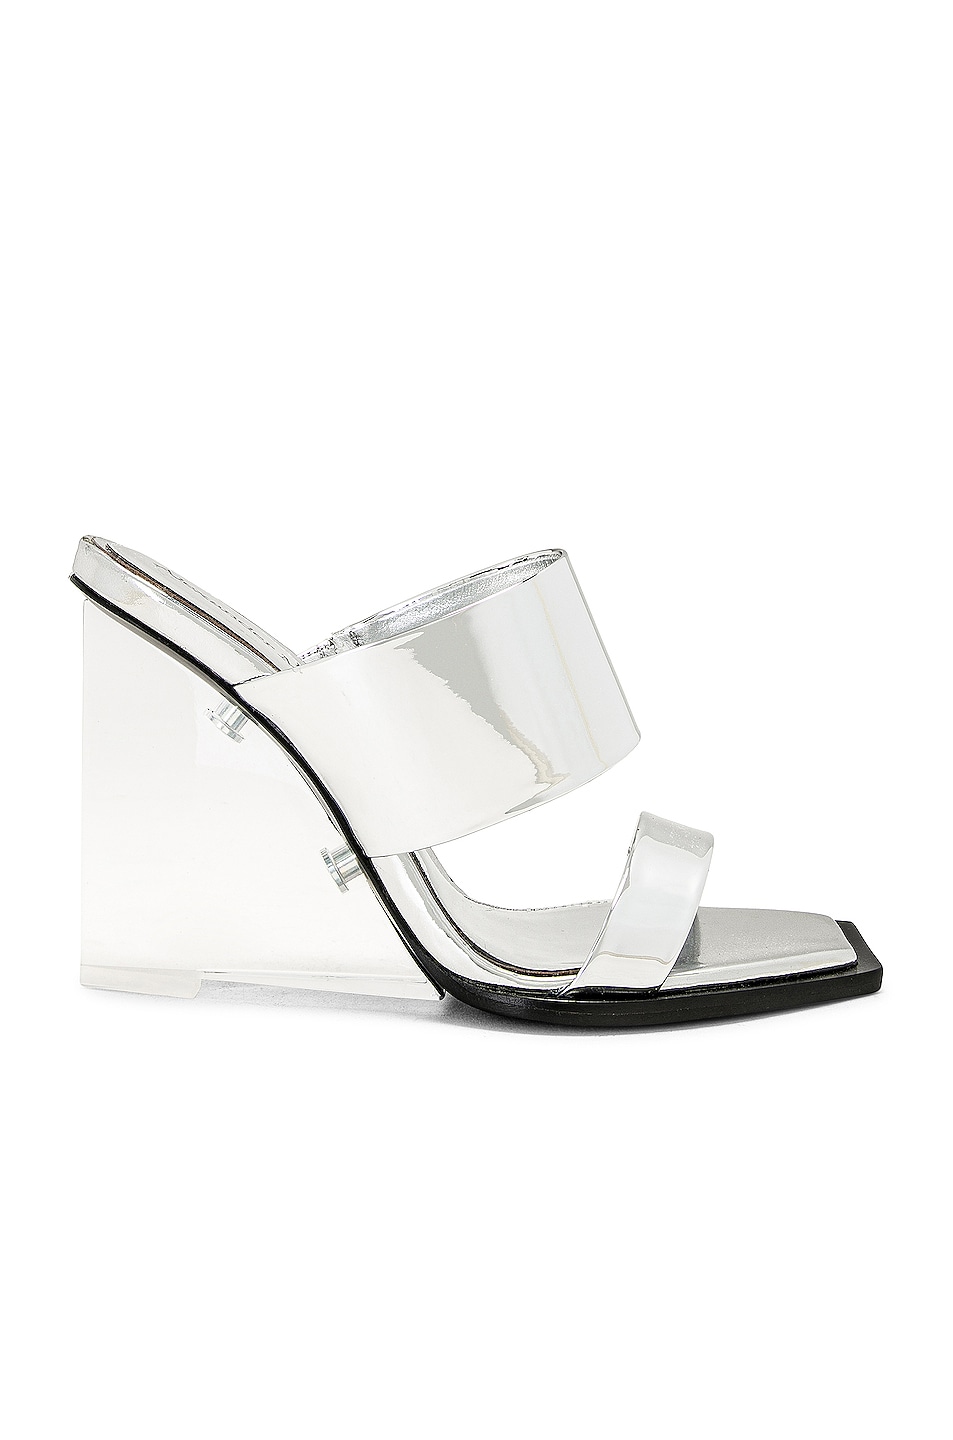 Image 1 of Alexander McQueen Double Strap Shard Wedge Sandal in Silver